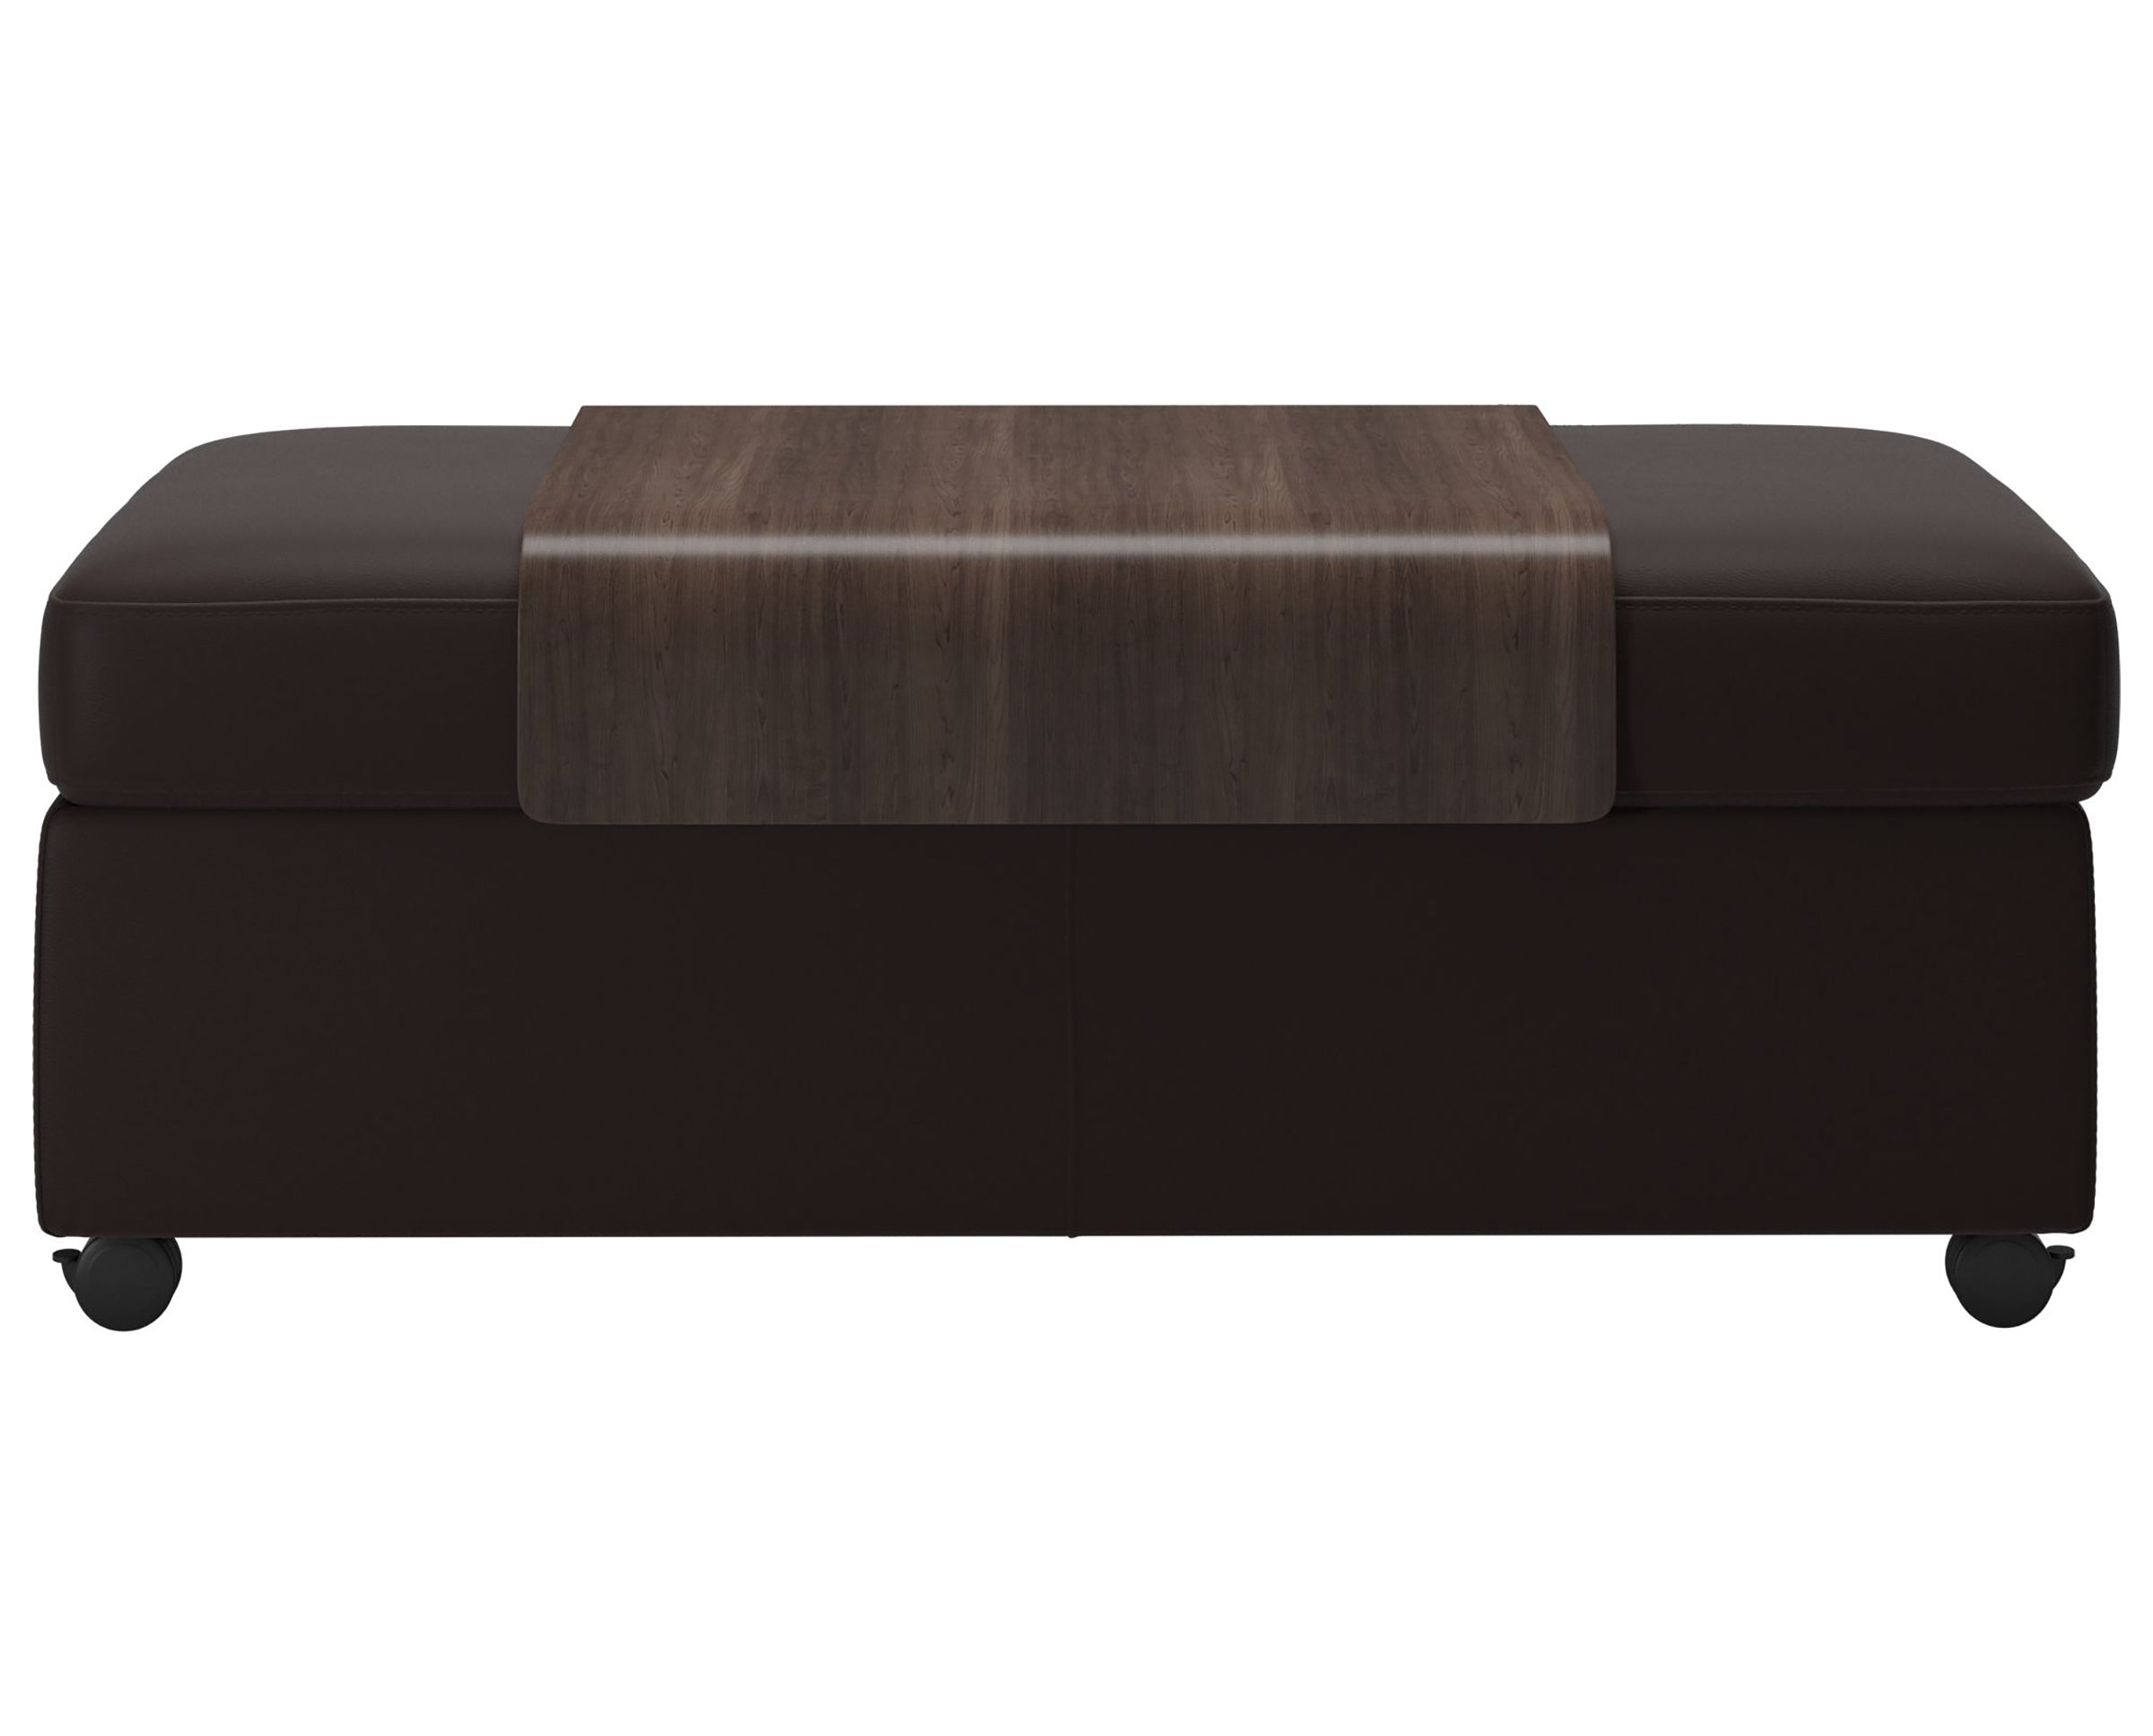 Paloma Leather Chocolate and Wenge Finish | Stressless Double Ottoman with Table | Valley Ridge Furniture